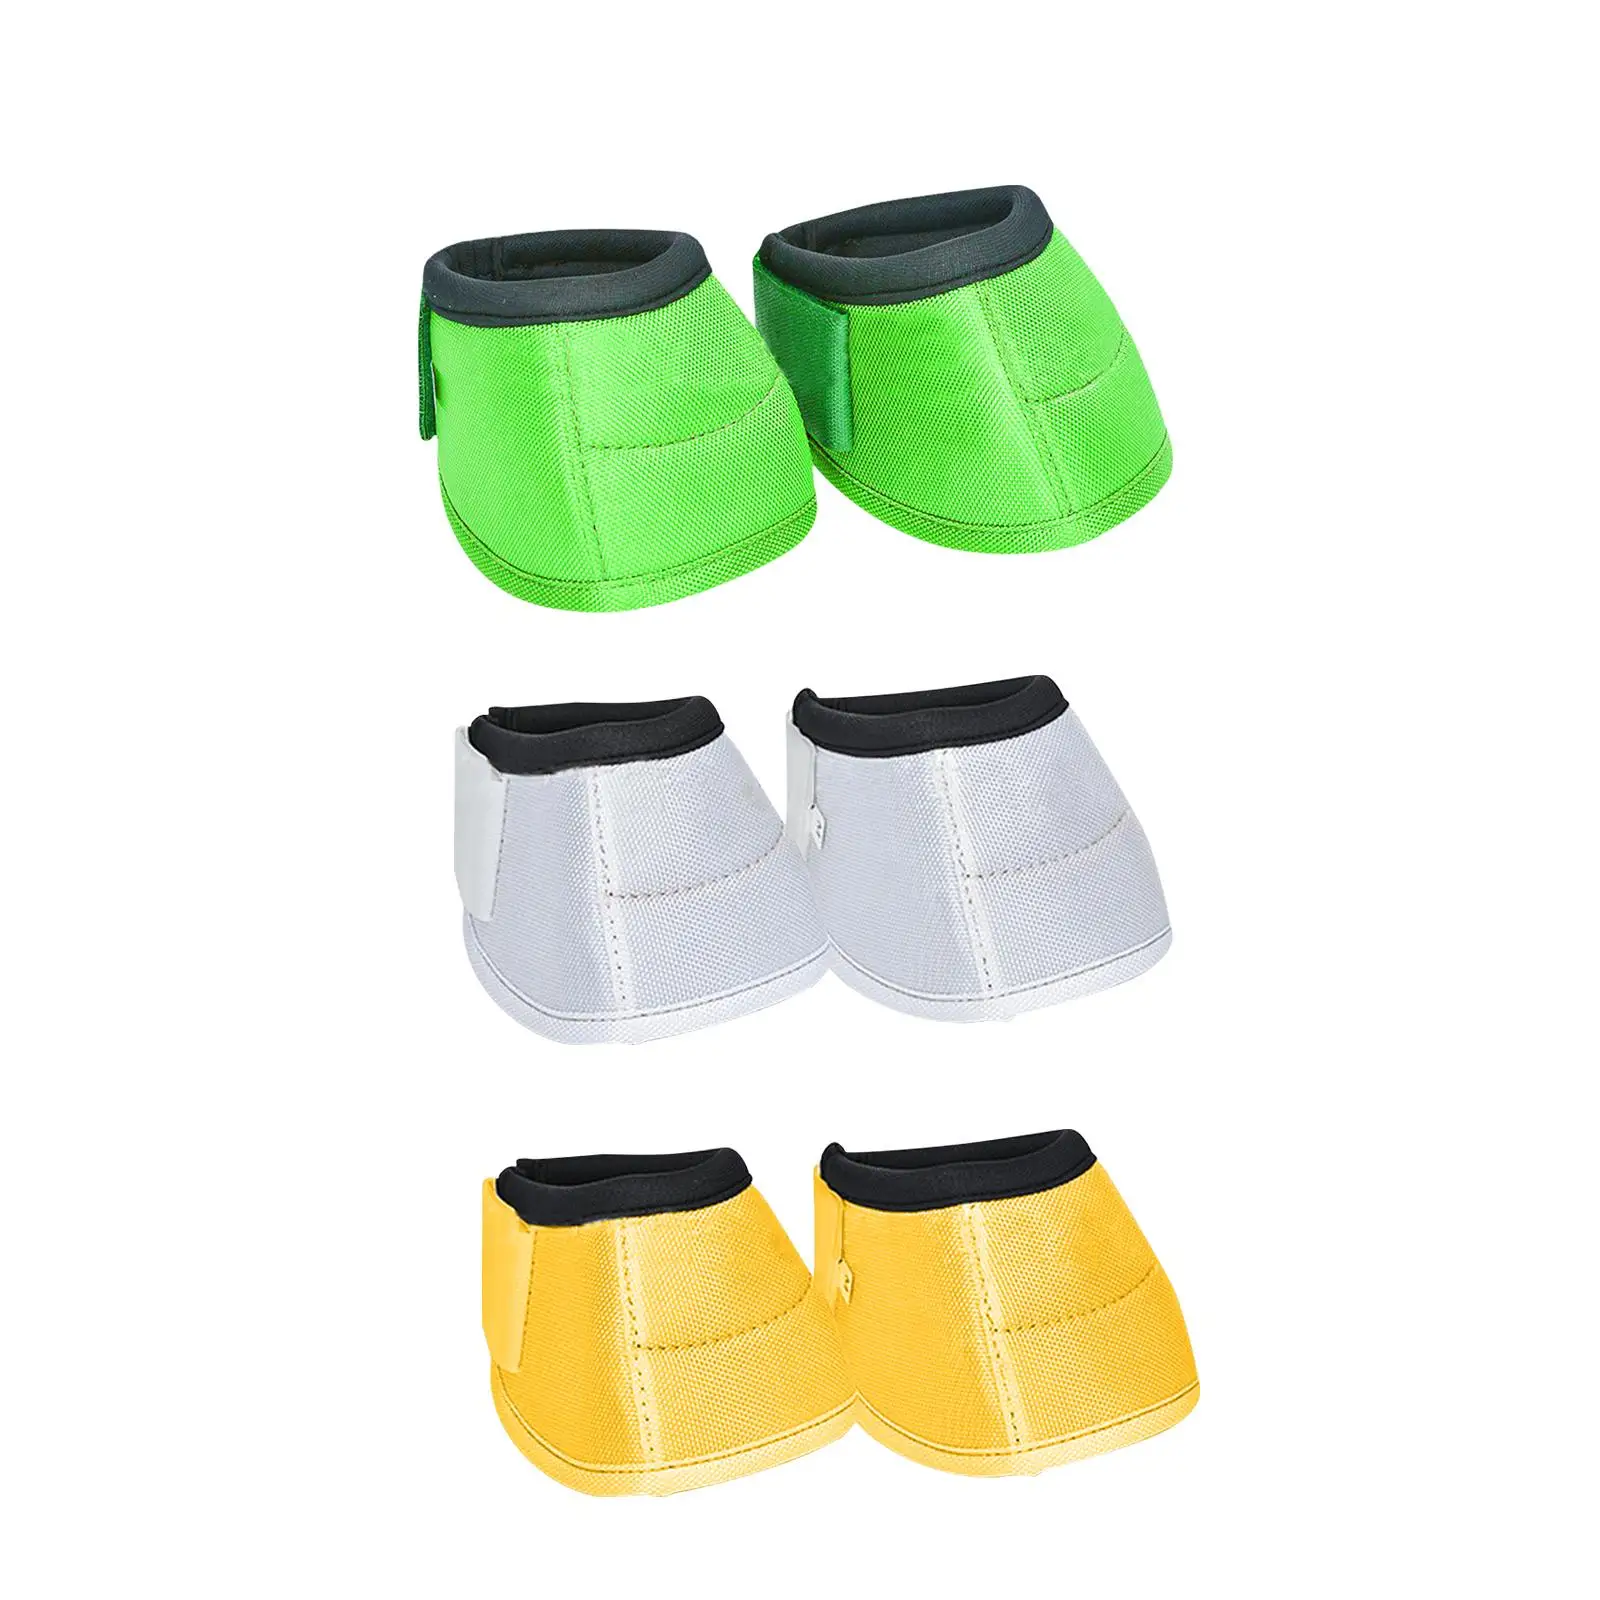 2Pcs Horse Bell Boots Horse Care Boot Durable 1680D Oxford Cloth Tear Resistant Shock Absorbing Lining for Riding and Turnout